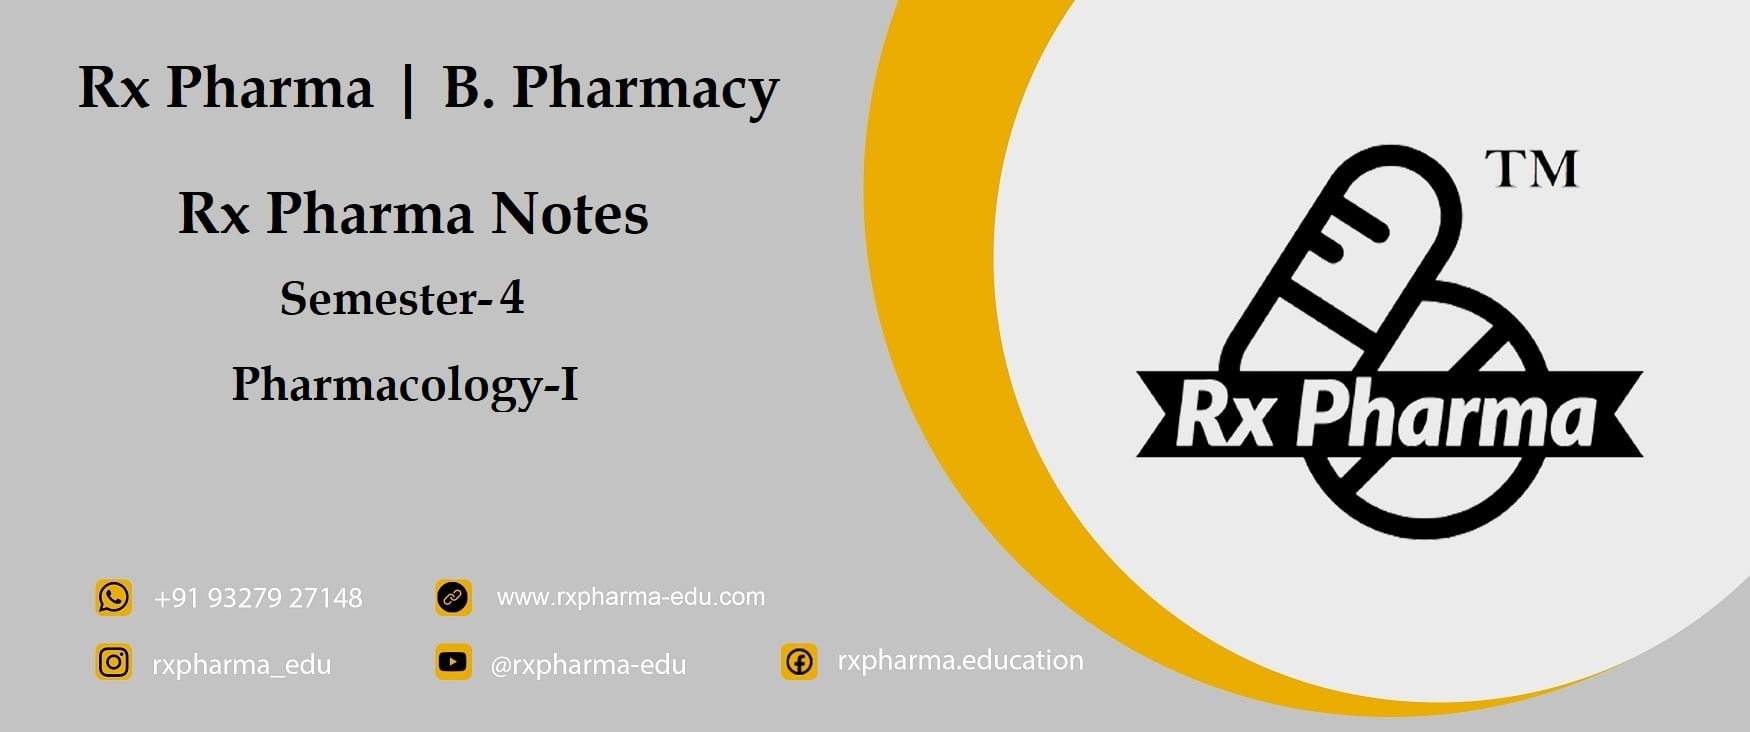 Pharmacology-1 Notes Banner